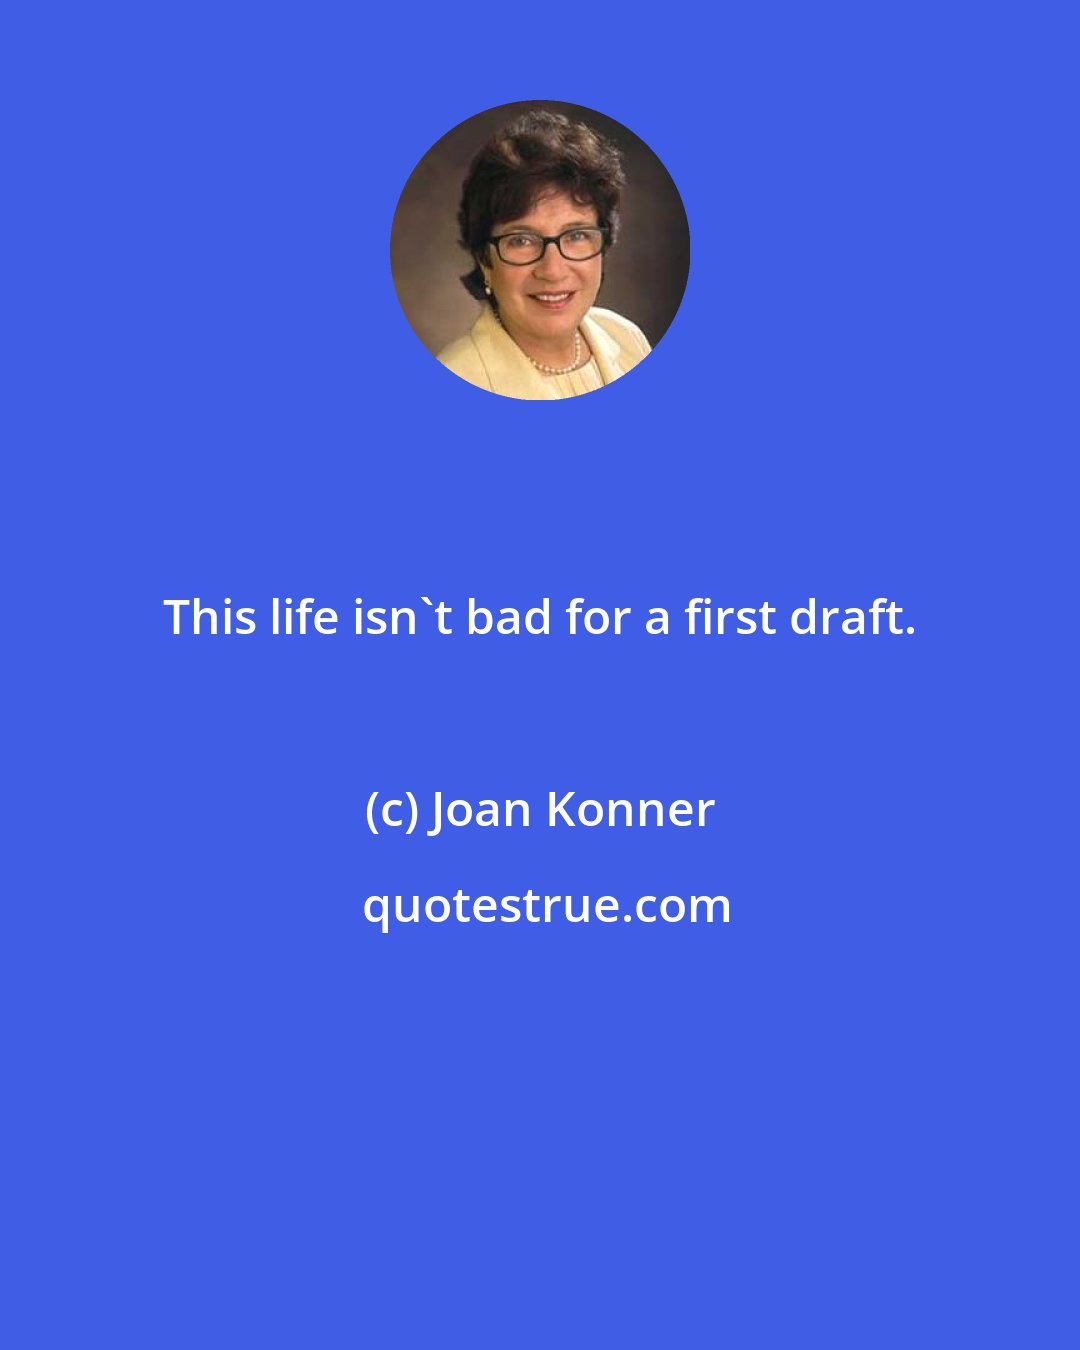 Joan Konner: This life isn't bad for a first draft.